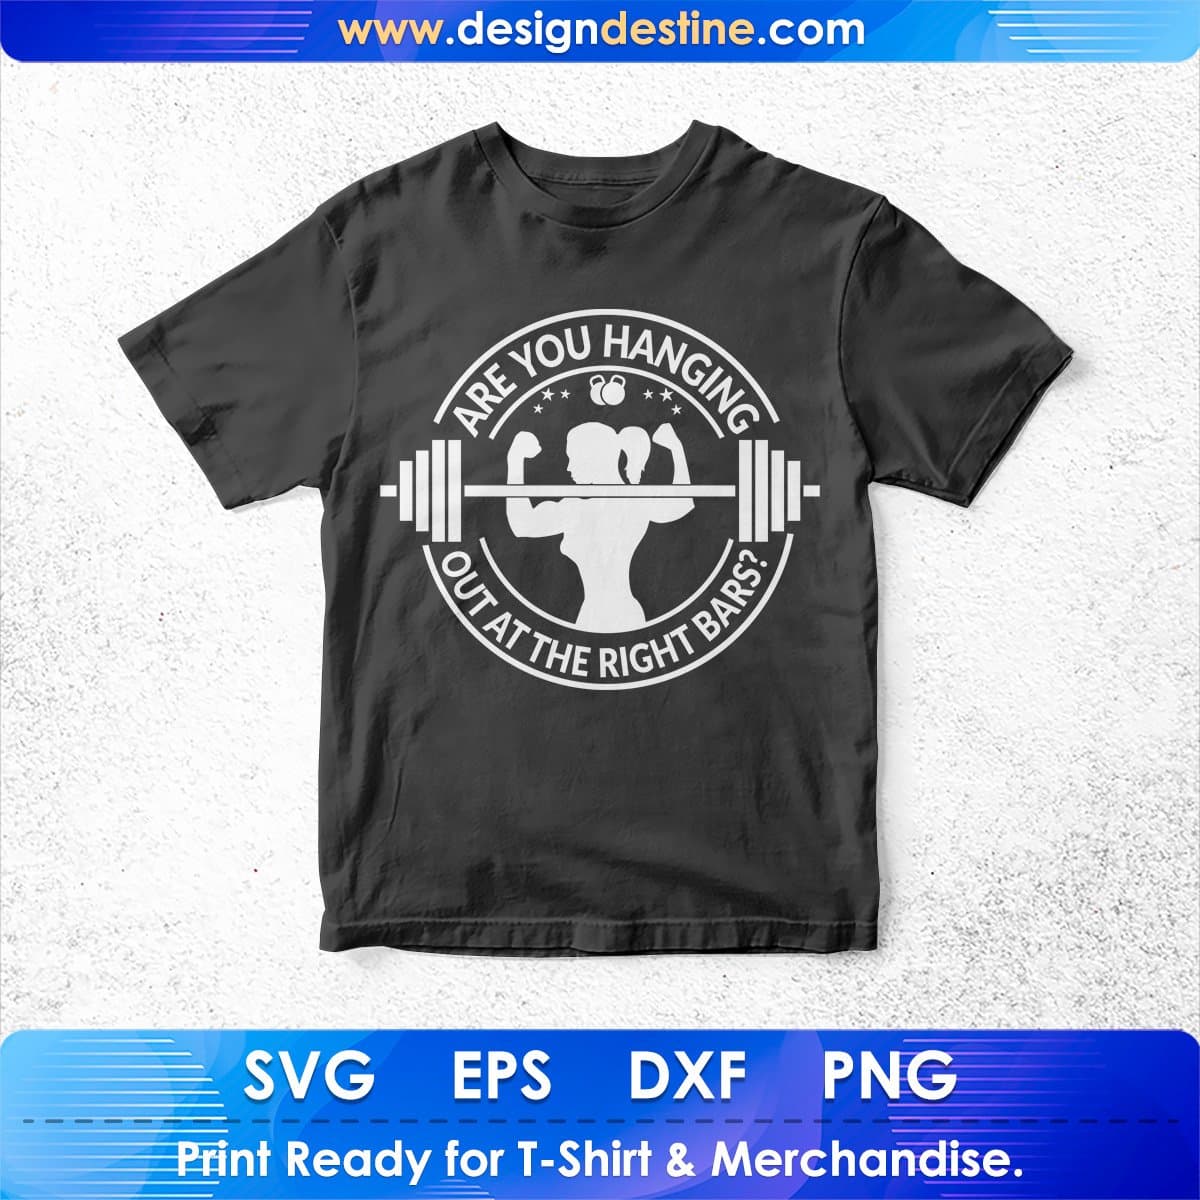 Are You Hanging Out At The Right Bars? T shirt Design In Svg Cutting Printable Files